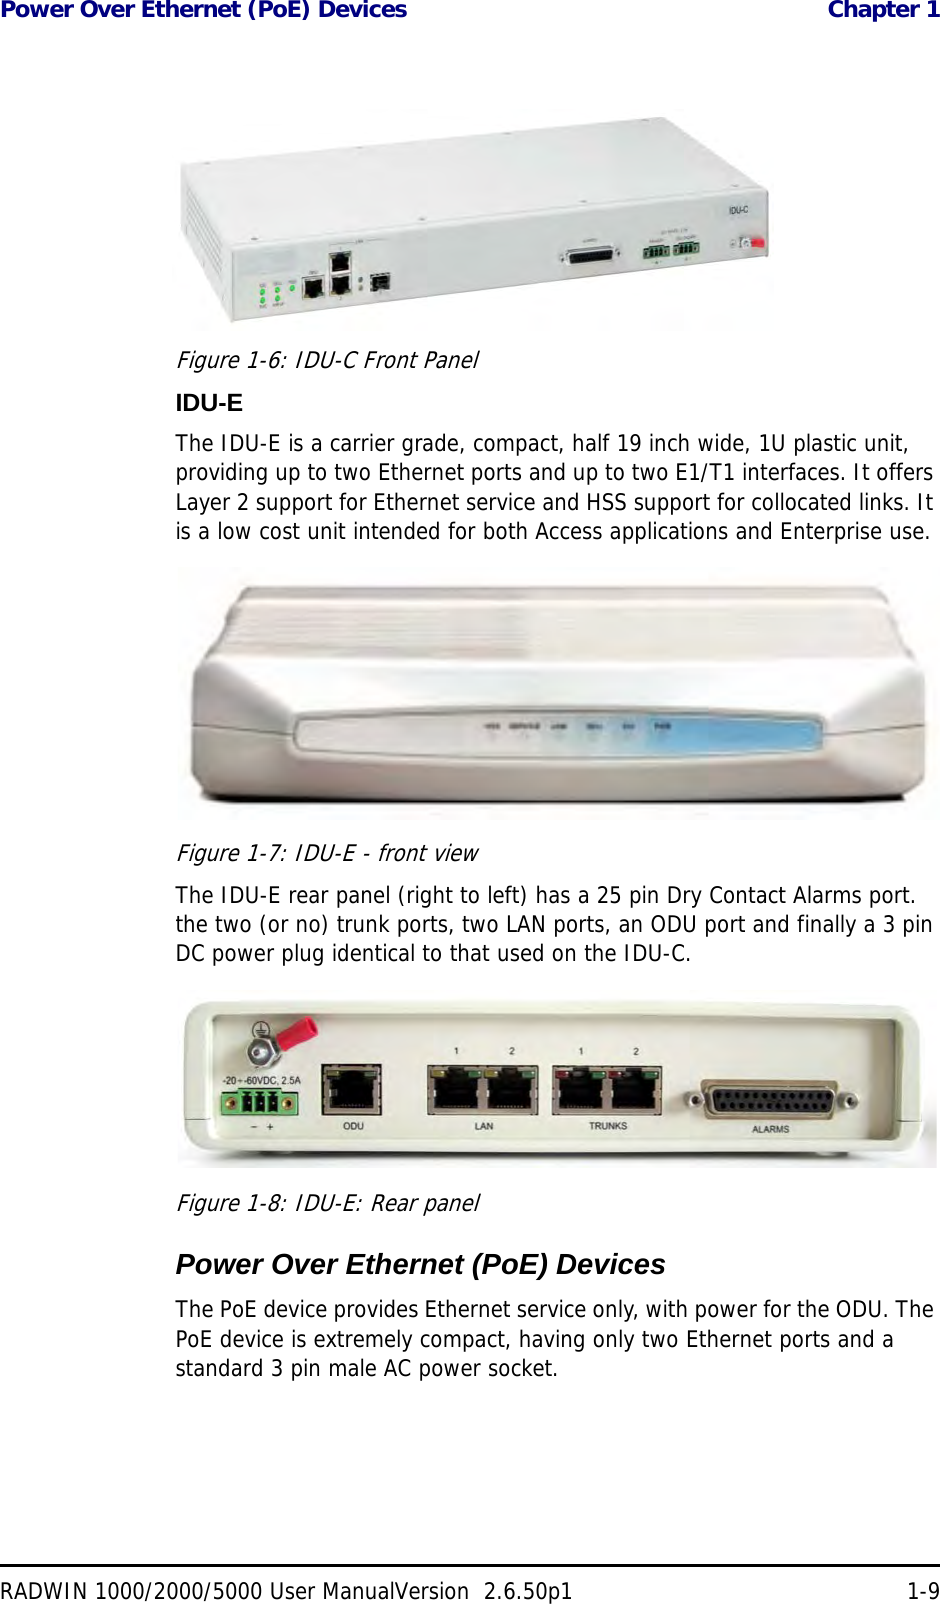 Power Over Ethernet (PoE) Devices  Chapter 1RADWIN 1000/2000/5000 User ManualVersion  2.6.50p1 1-9Figure 1-6: IDU-C Front PanelIDU-EThe IDU-E is a carrier grade, compact, half 19 inch wide, 1U plastic unit, providing up to two Ethernet ports and up to two E1/T1 interfaces. It offers Layer 2 support for Ethernet service and HSS support for collocated links. It is a low cost unit intended for both Access applications and Enterprise use.Figure 1-7: IDU-E - front viewThe IDU-E rear panel (right to left) has a 25 pin Dry Contact Alarms port. the two (or no) trunk ports, two LAN ports, an ODU port and finally a 3 pin DC power plug identical to that used on the IDU-C.Figure 1-8: IDU-E: Rear panelPower Over Ethernet (PoE) DevicesThe PoE device provides Ethernet service only, with power for the ODU. The PoE device is extremely compact, having only two Ethernet ports and a standard 3 pin male AC power socket.